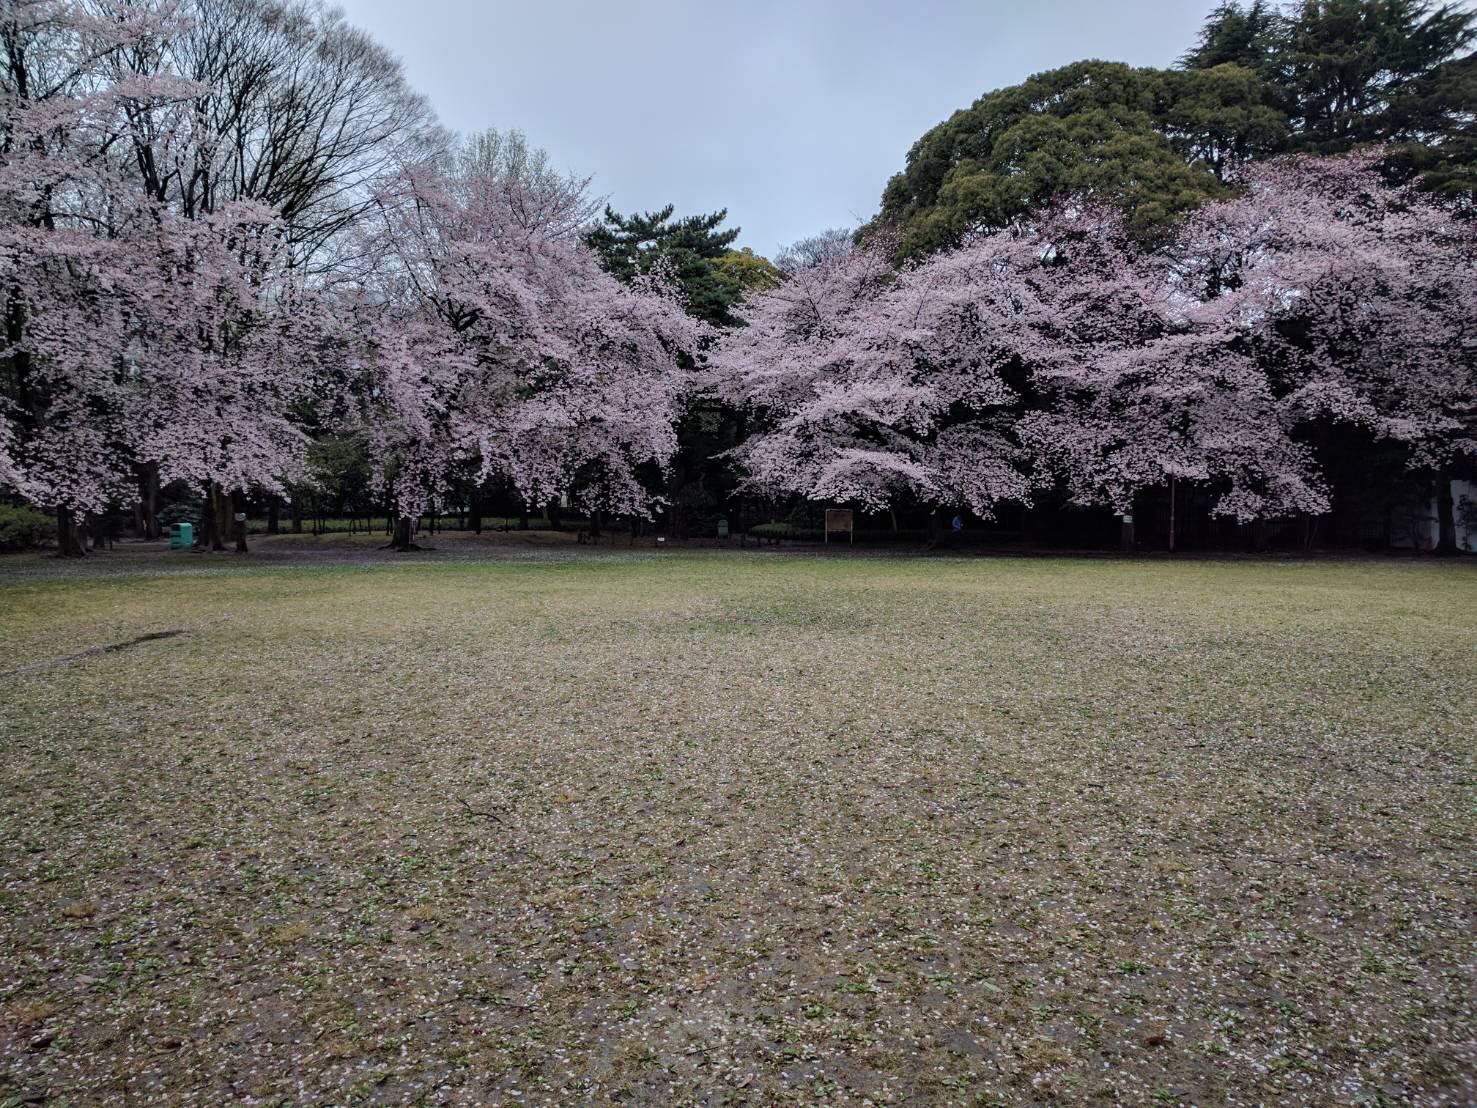 My first Hanami after moved to Japan